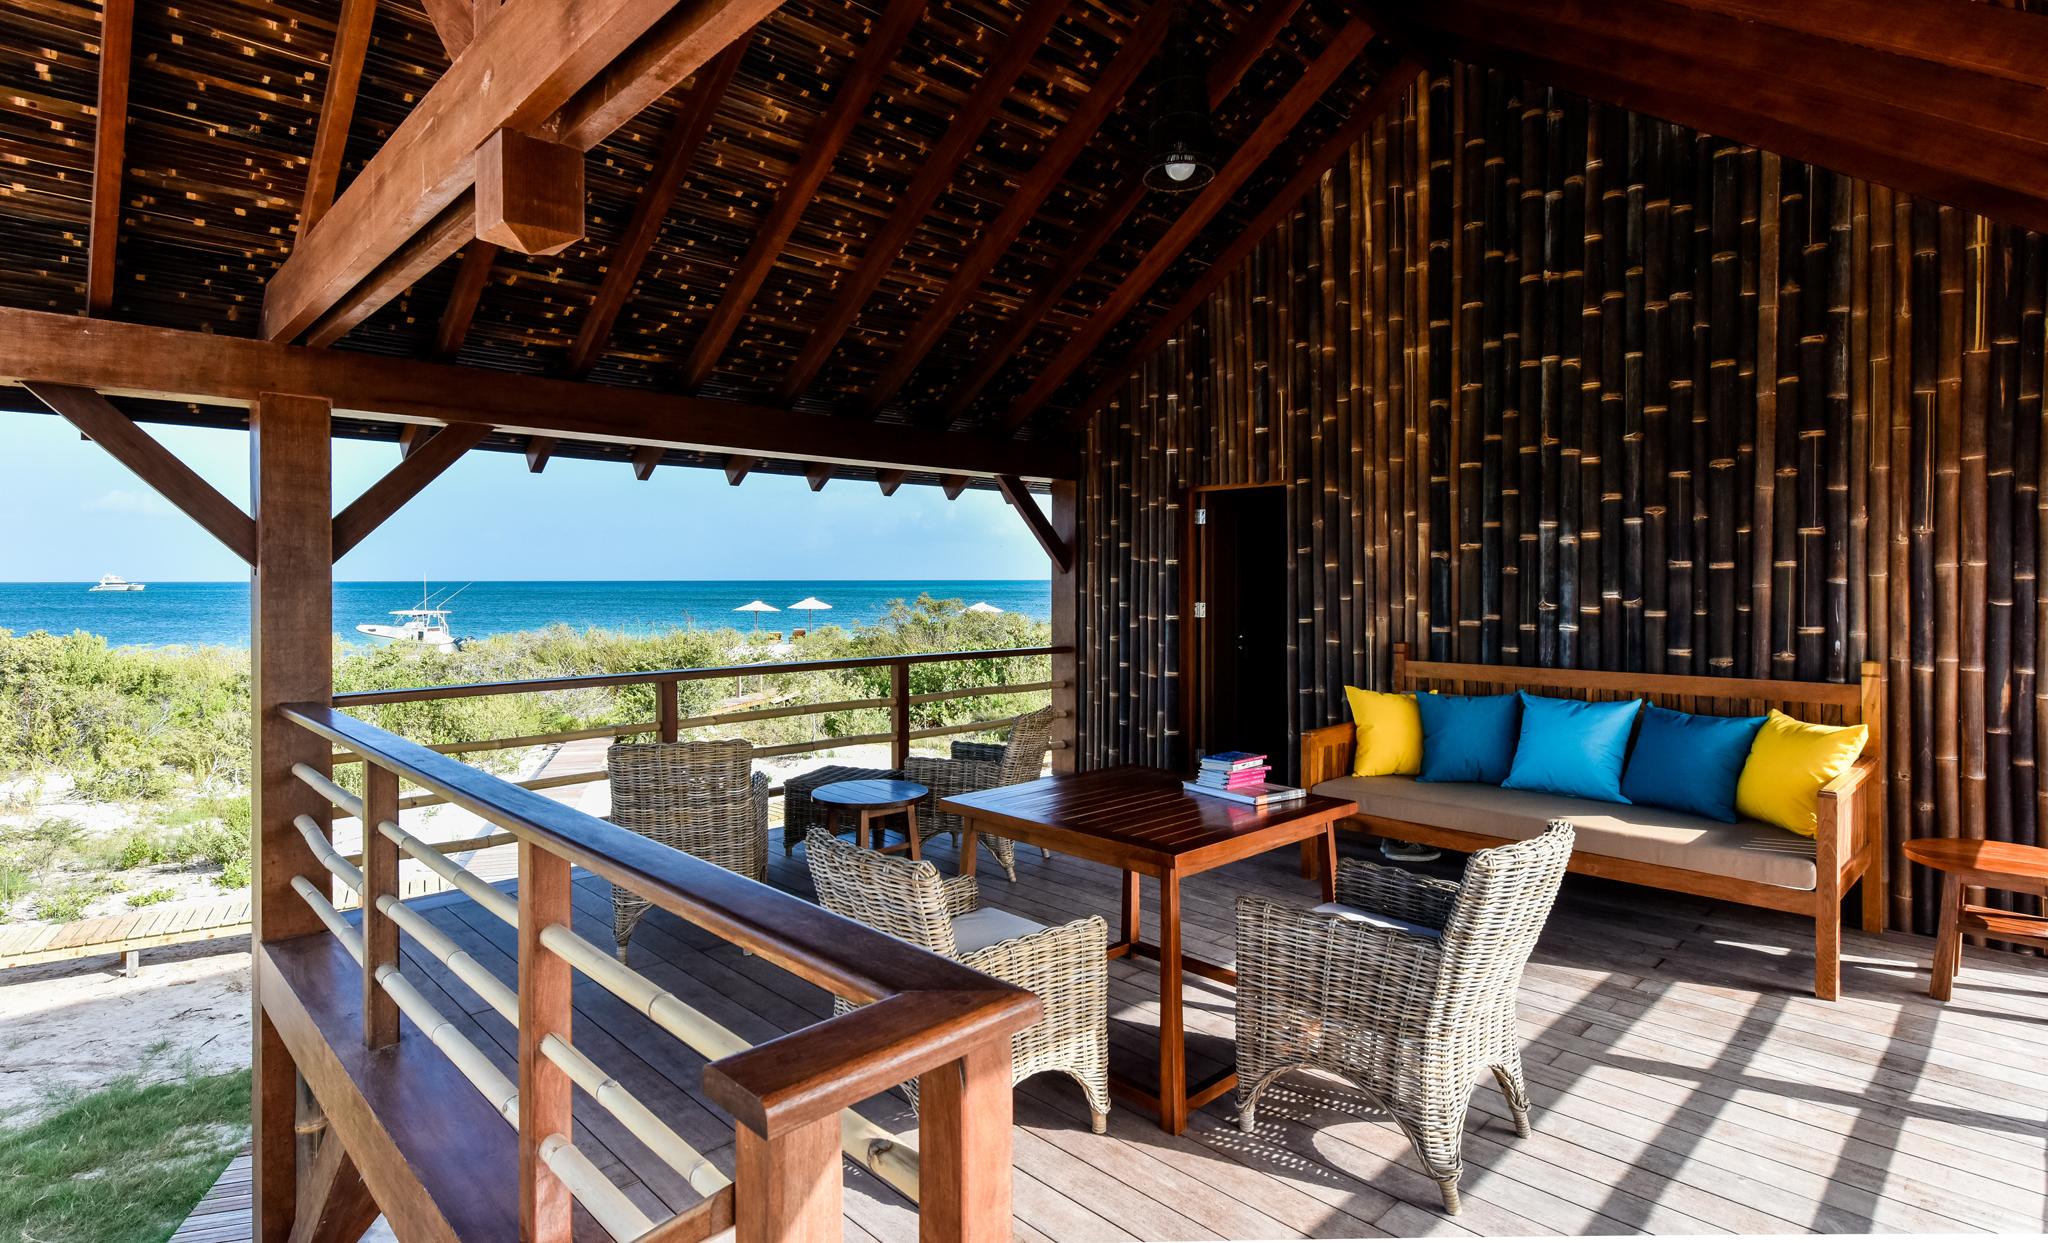 Balconies, with their own dining areas, look out on to the sea